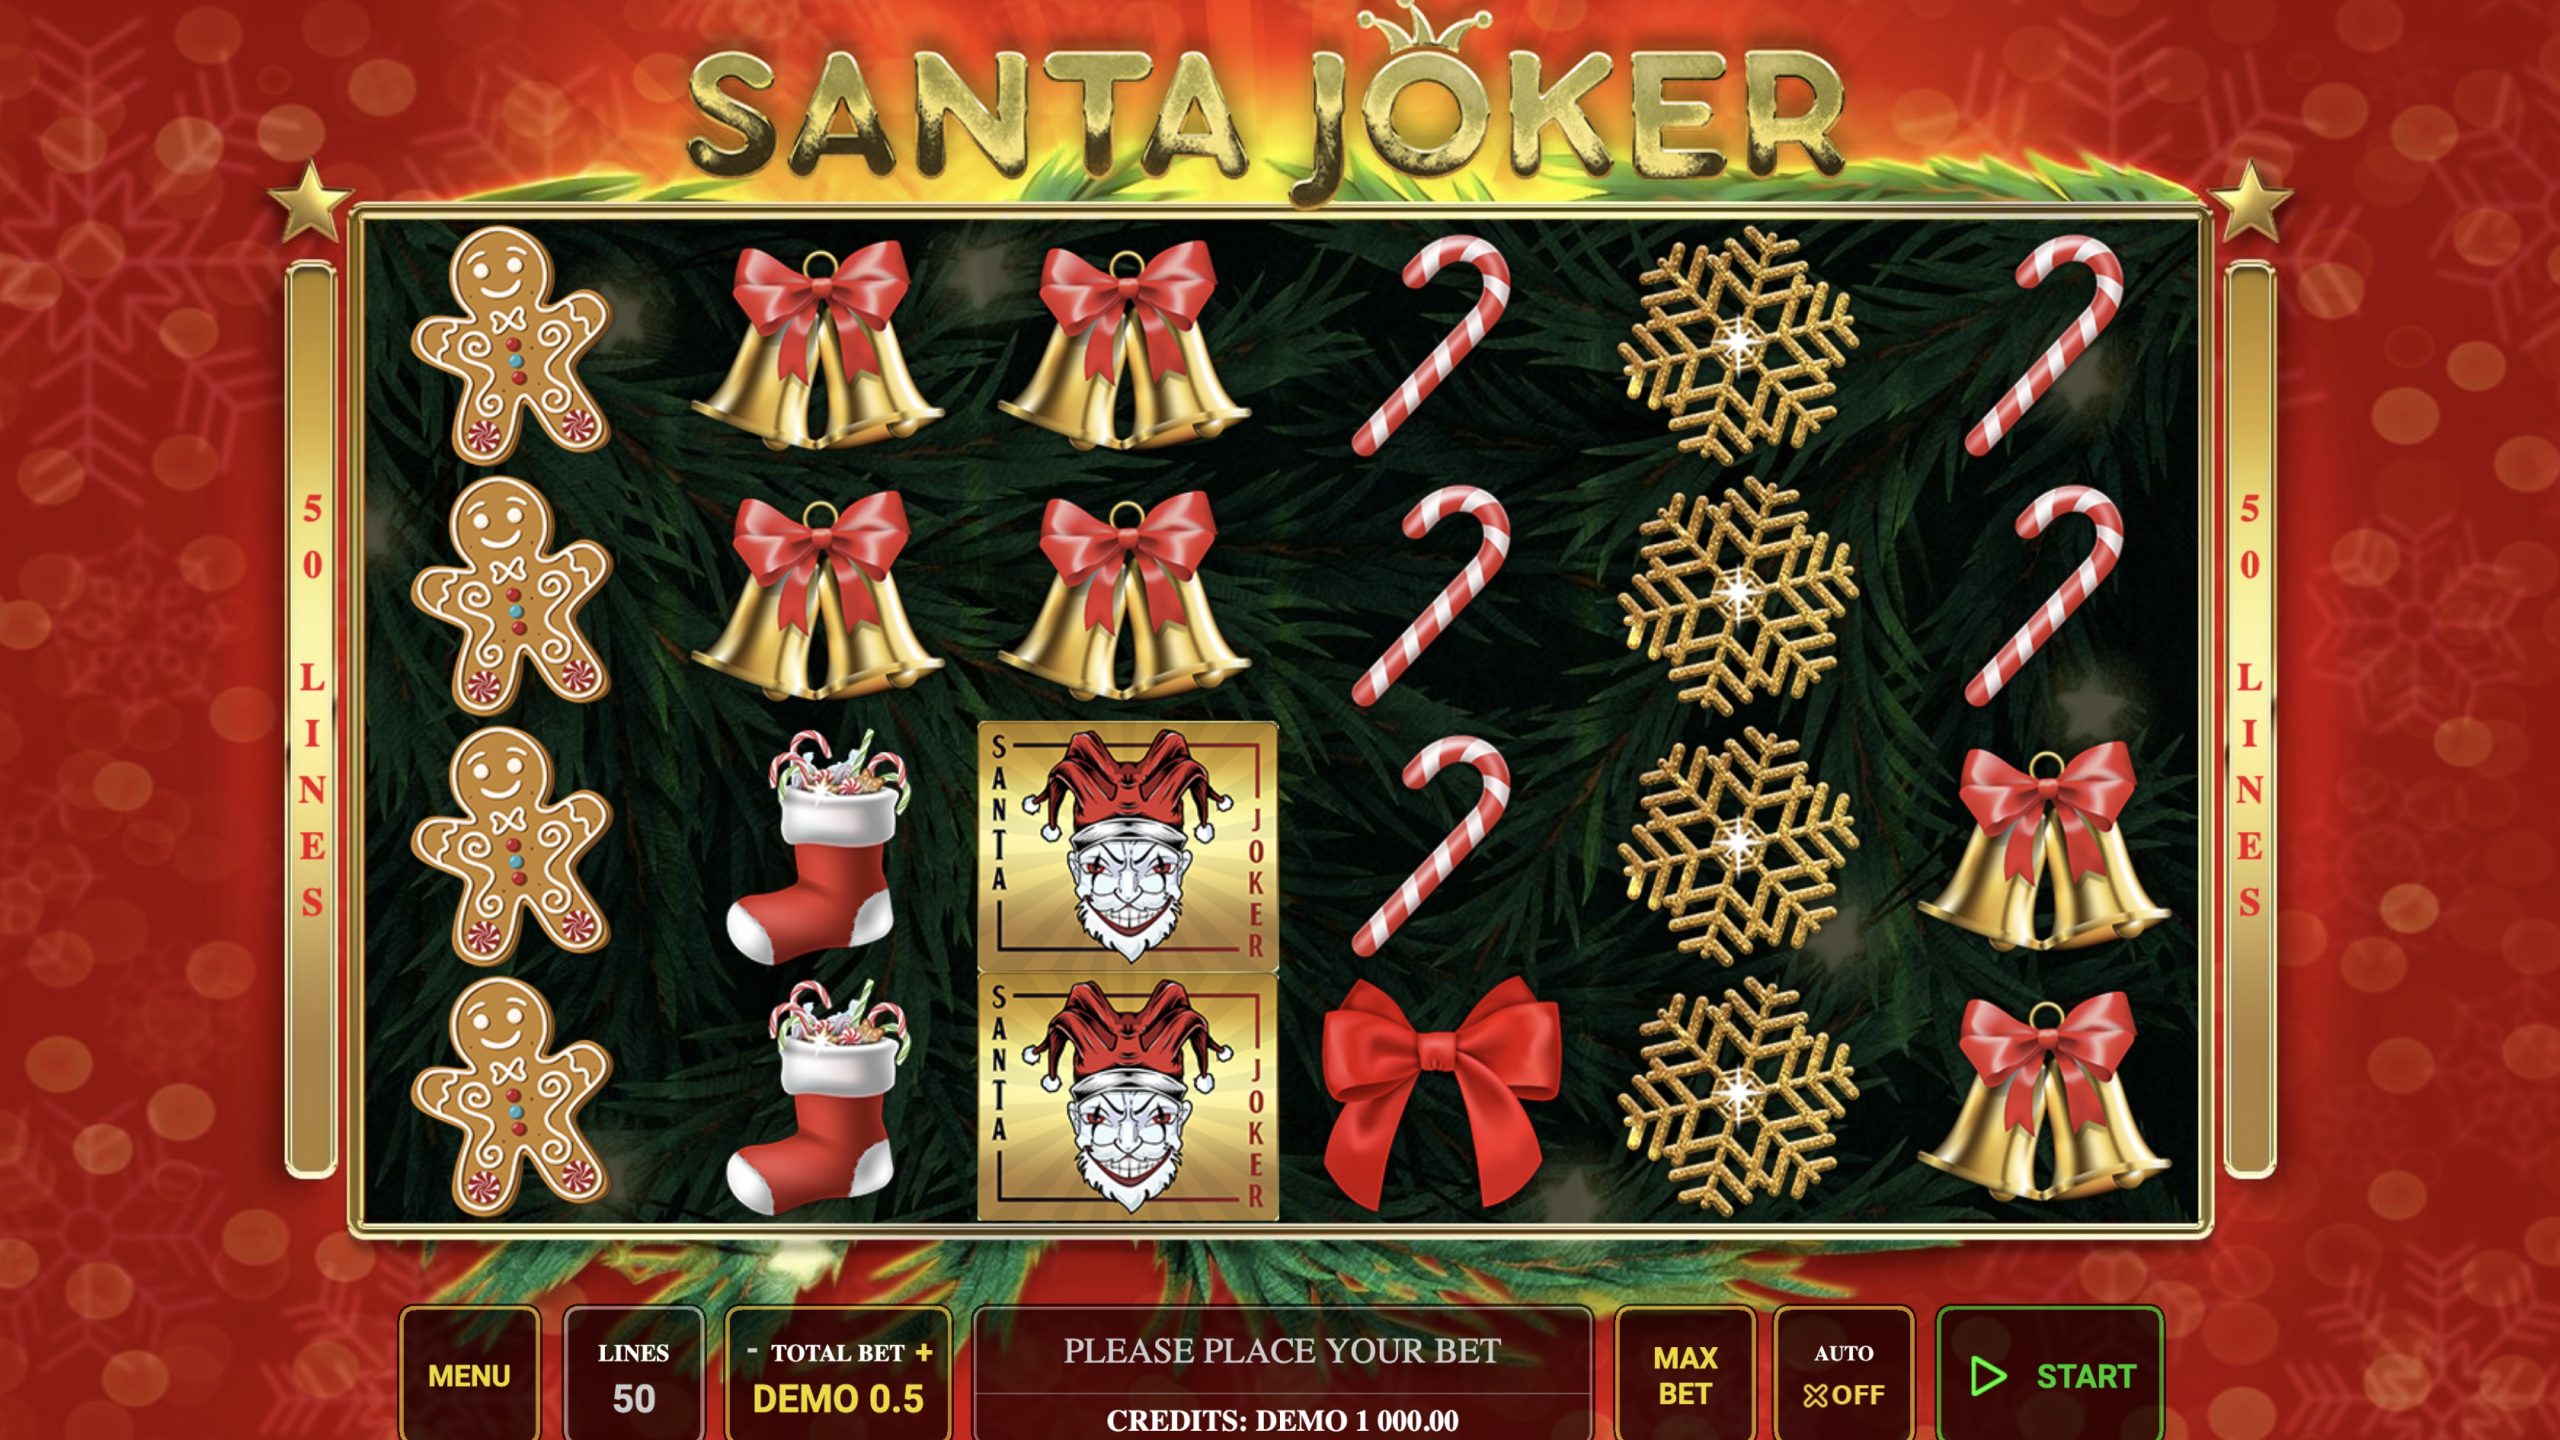 Santa Joker is a 6x4, 50-payline video slot that comes with a maximum win potential of up to x2,500 the bet. 